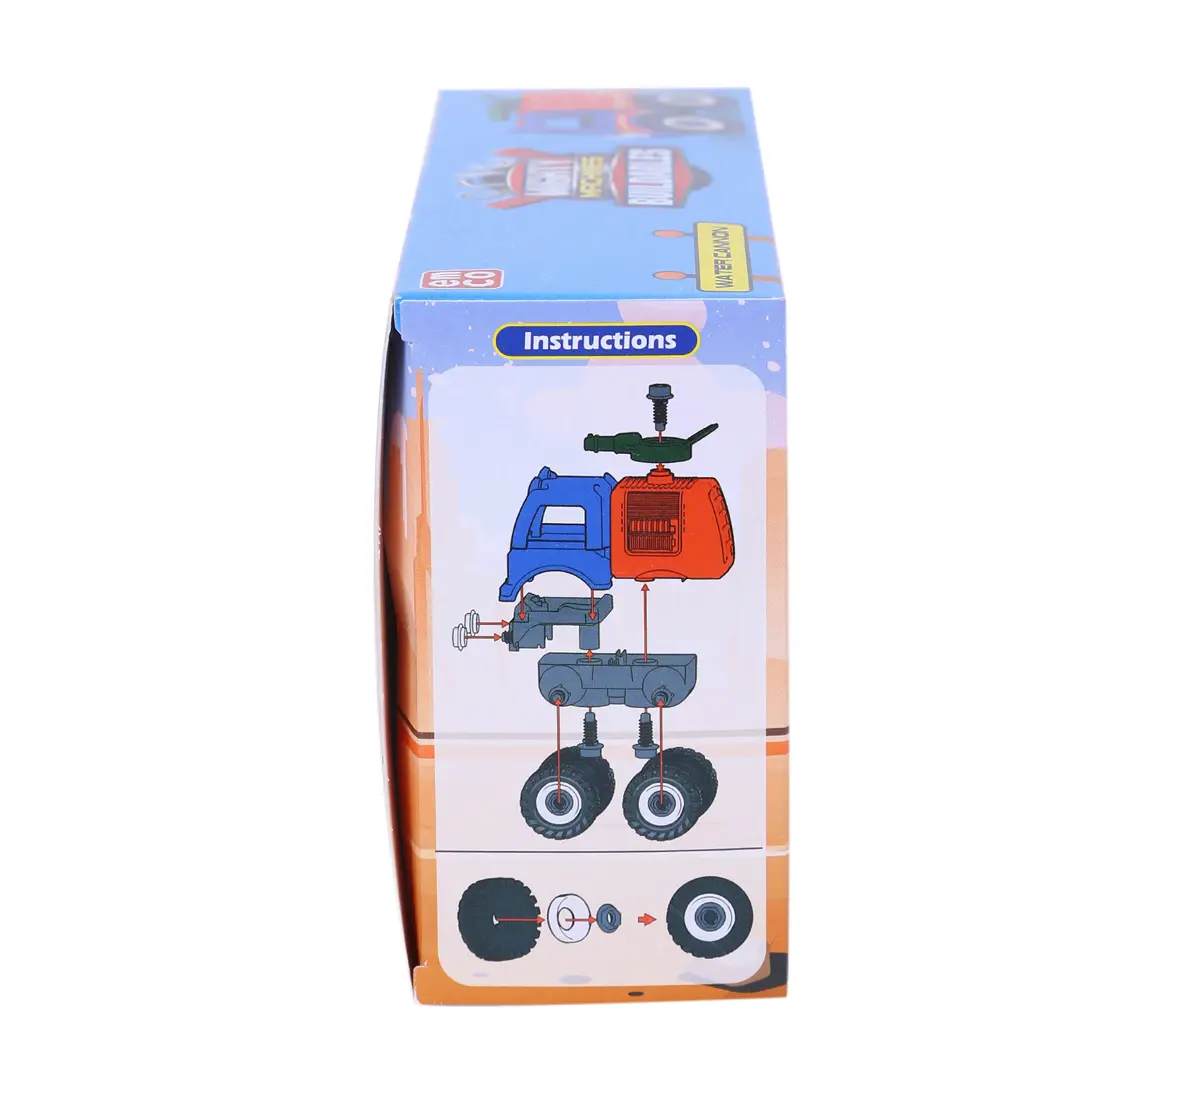 Mighty Machines Water Cannon Construction Vechile for kids 3Y+, Multicolour